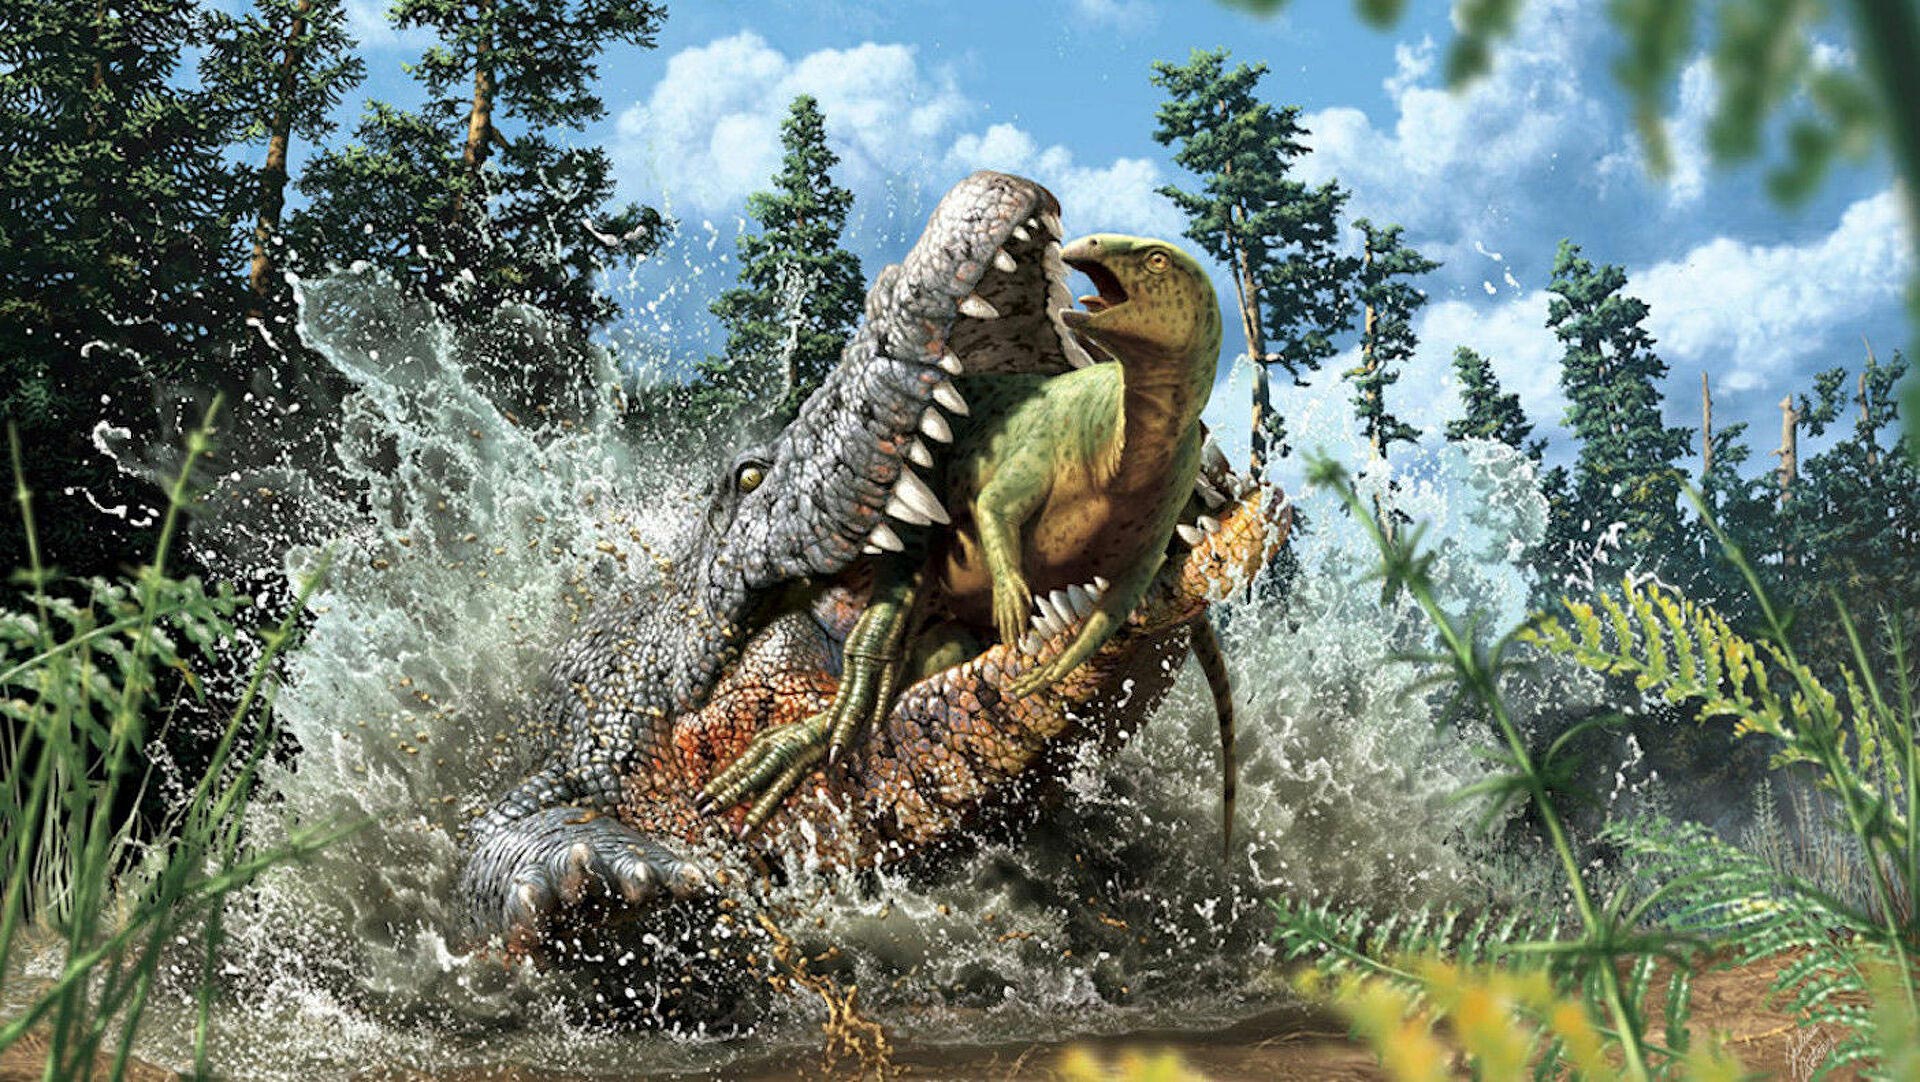 93-Million-Year-Old “Killer” Crocodile Discovered With a Baby Dinosaur in Its Stomach thumbnail